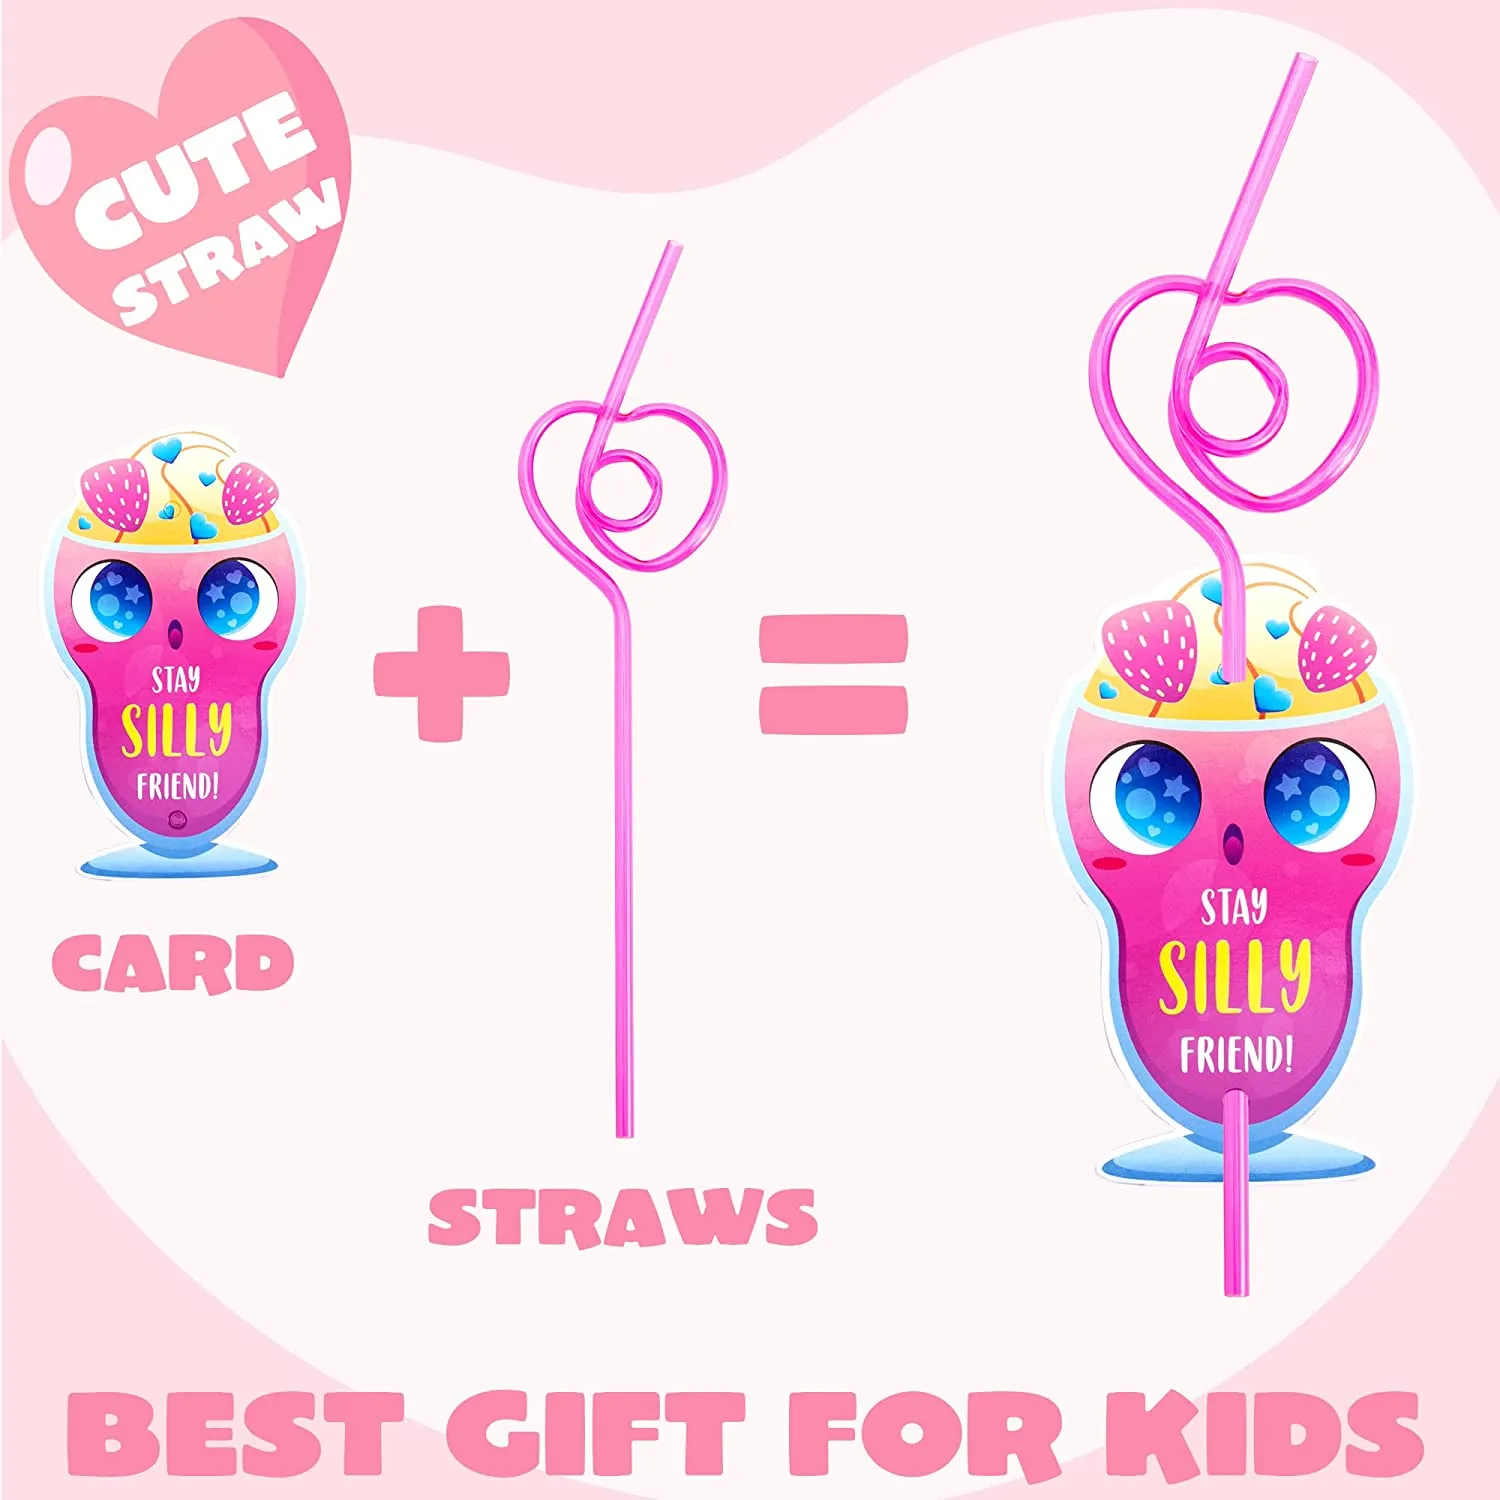 Heart Shaped Silly Straws